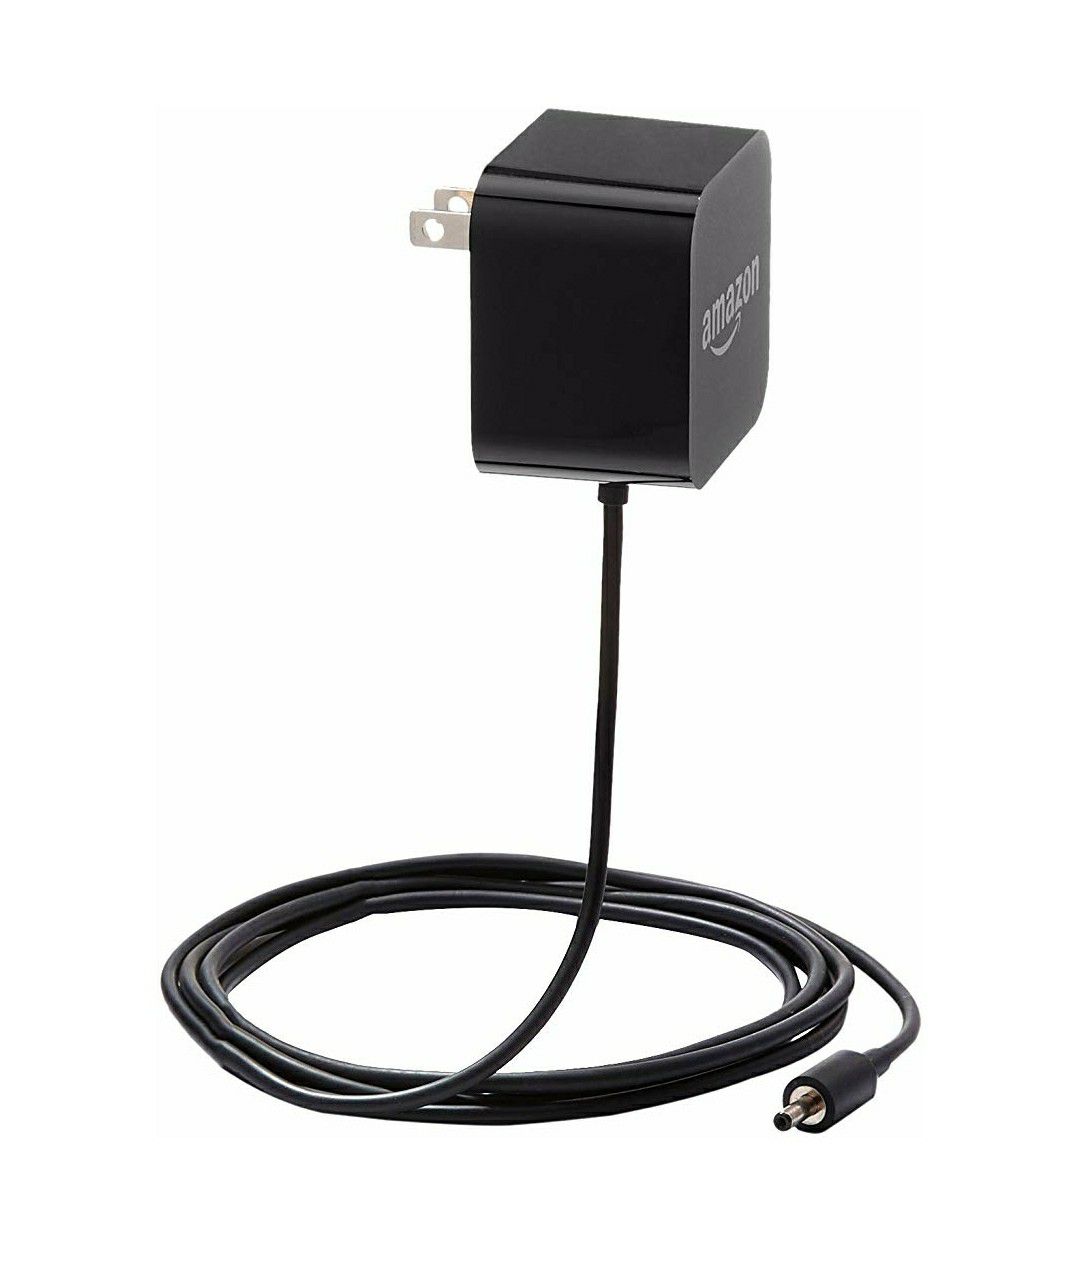 Official Amazon 21W power adapter for the Amazon Echo